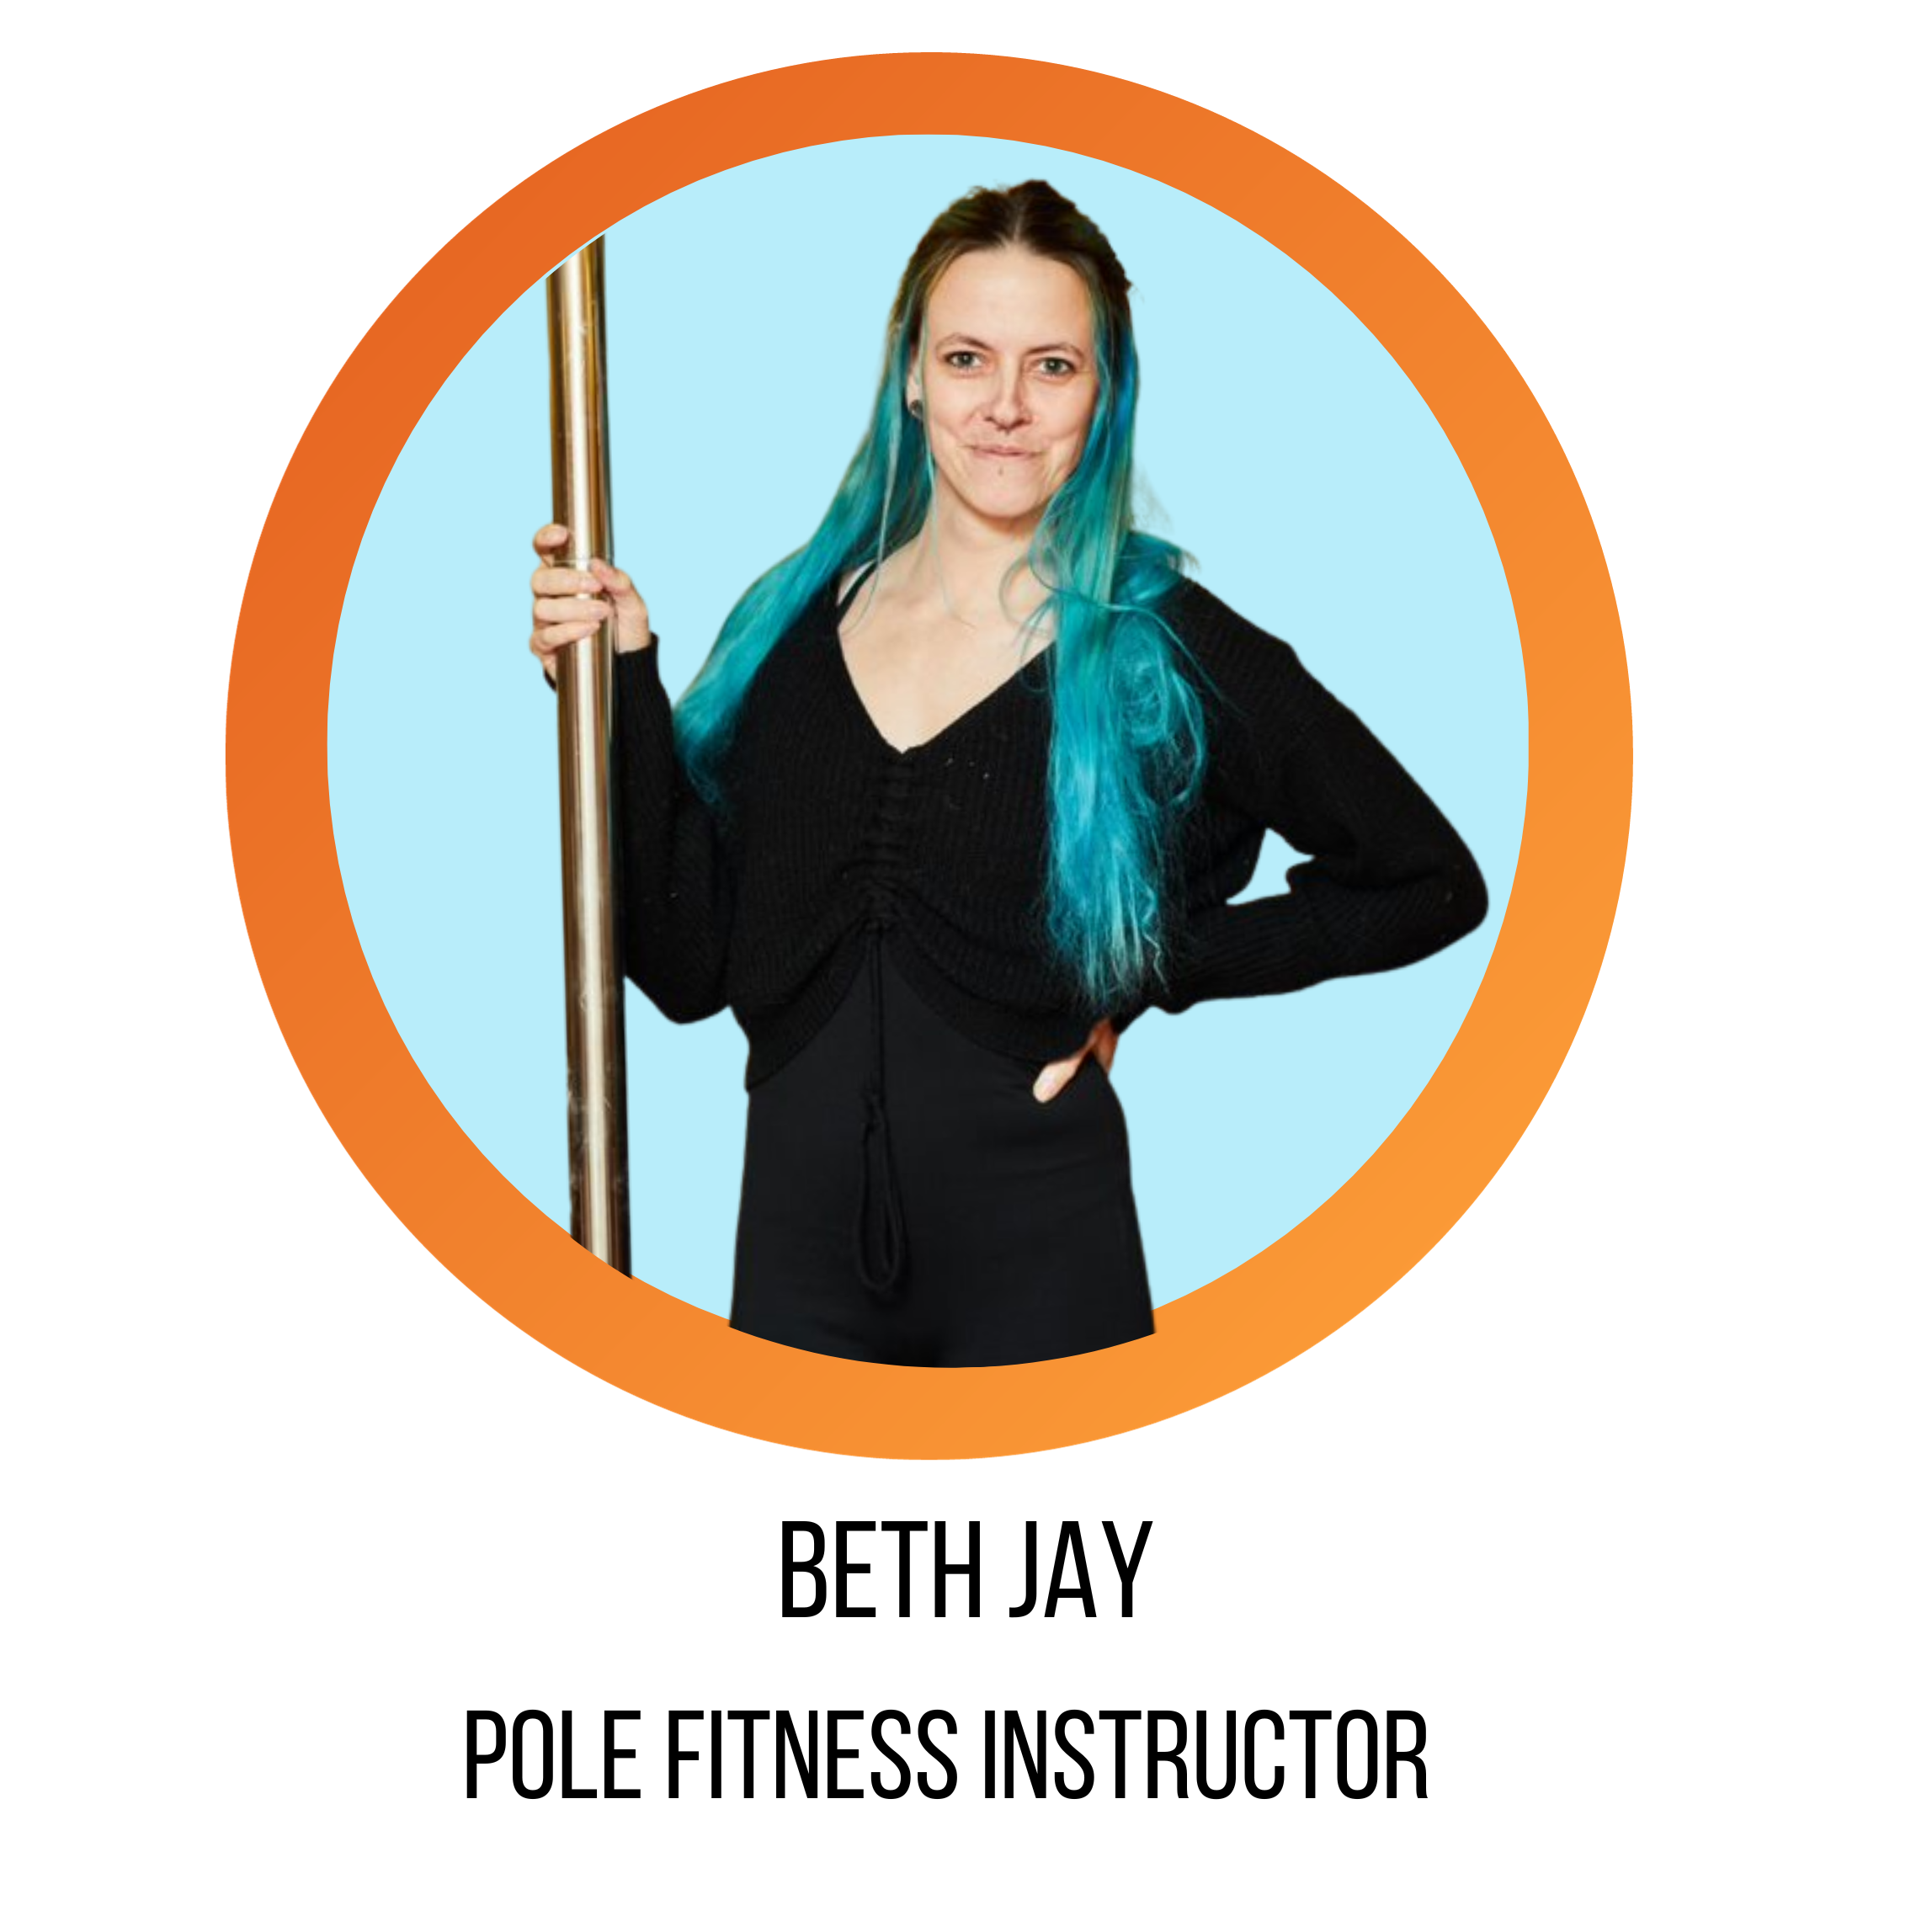 beth jay, pole fitness instructor, smiling in front of a blue background holding a pole